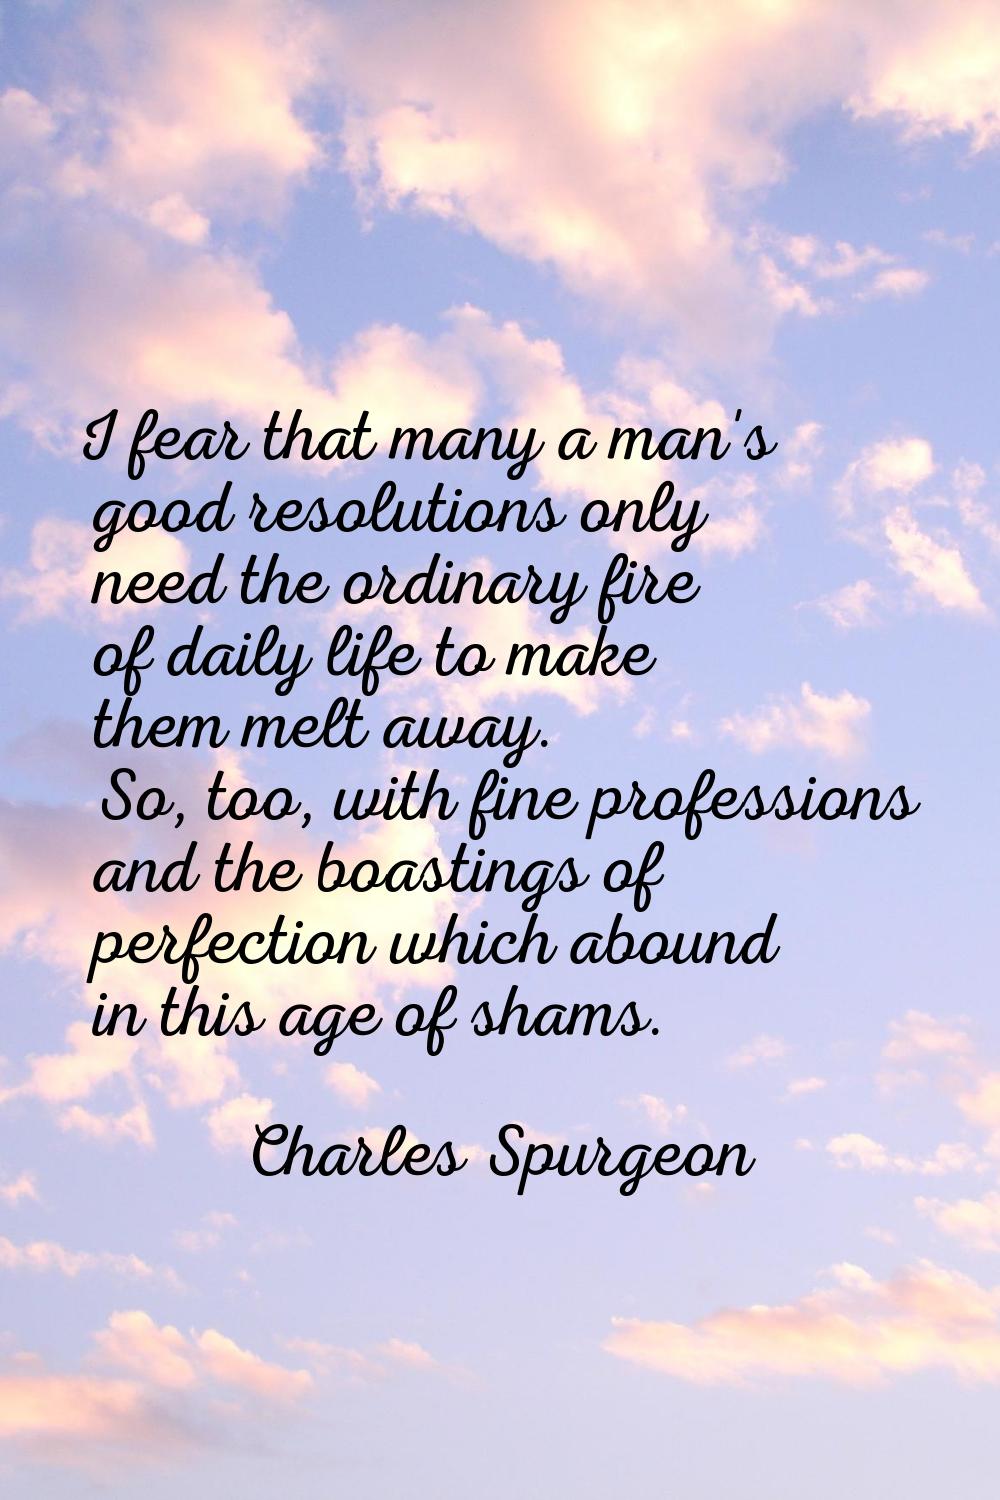 I fear that many a man's good resolutions only need the ordinary fire of daily life to make them me